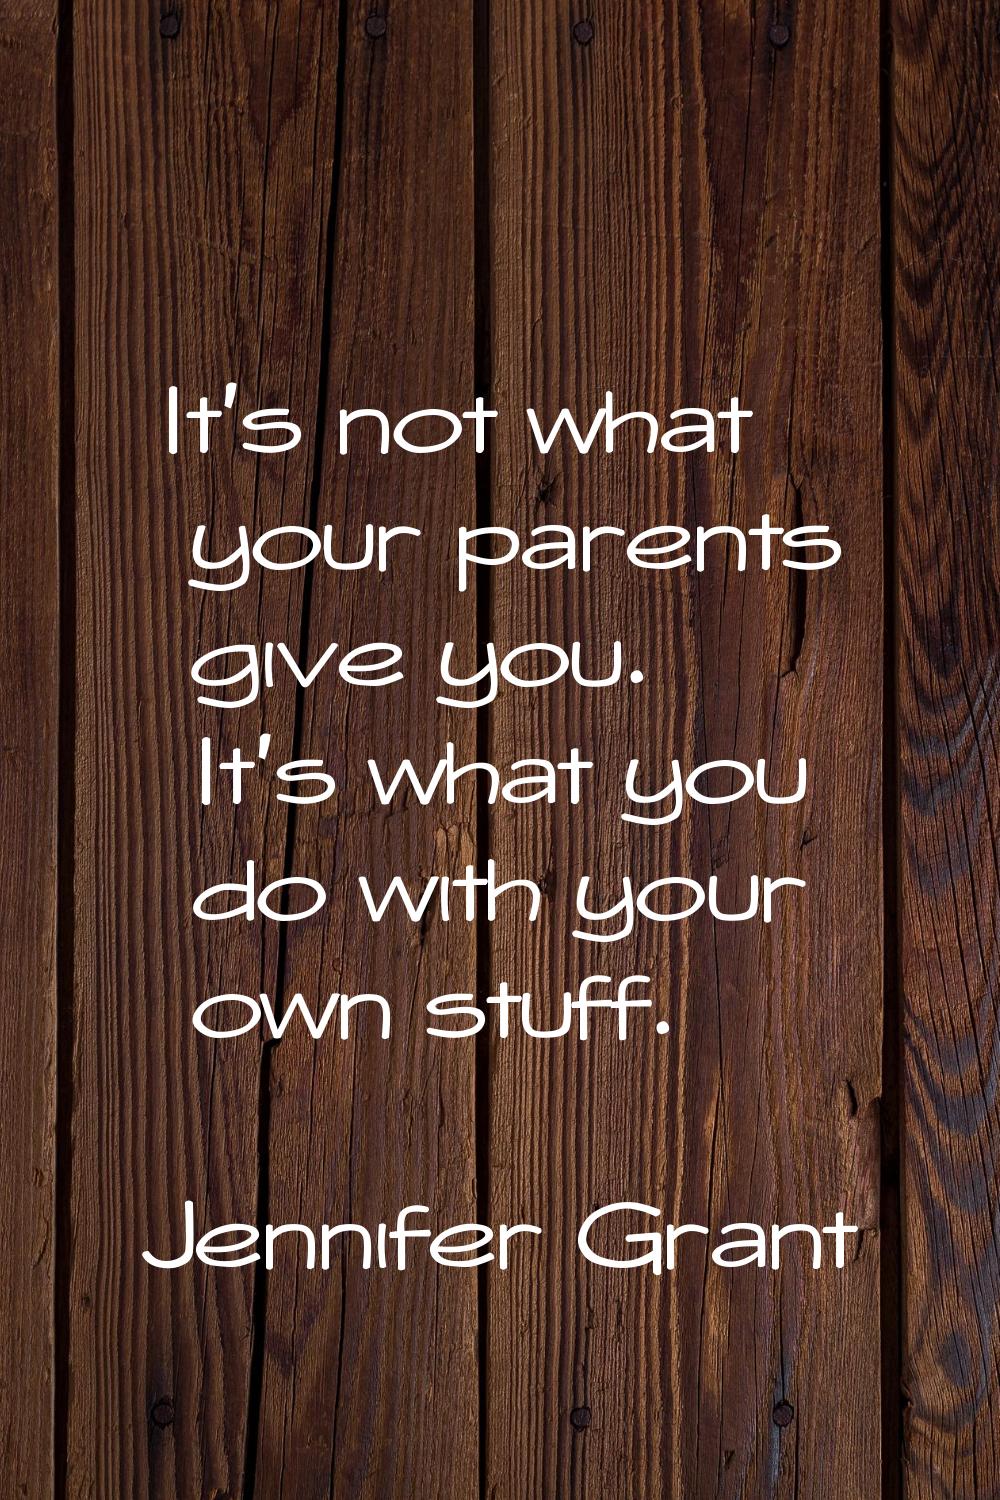 It's not what your parents give you. It's what you do with your own stuff.